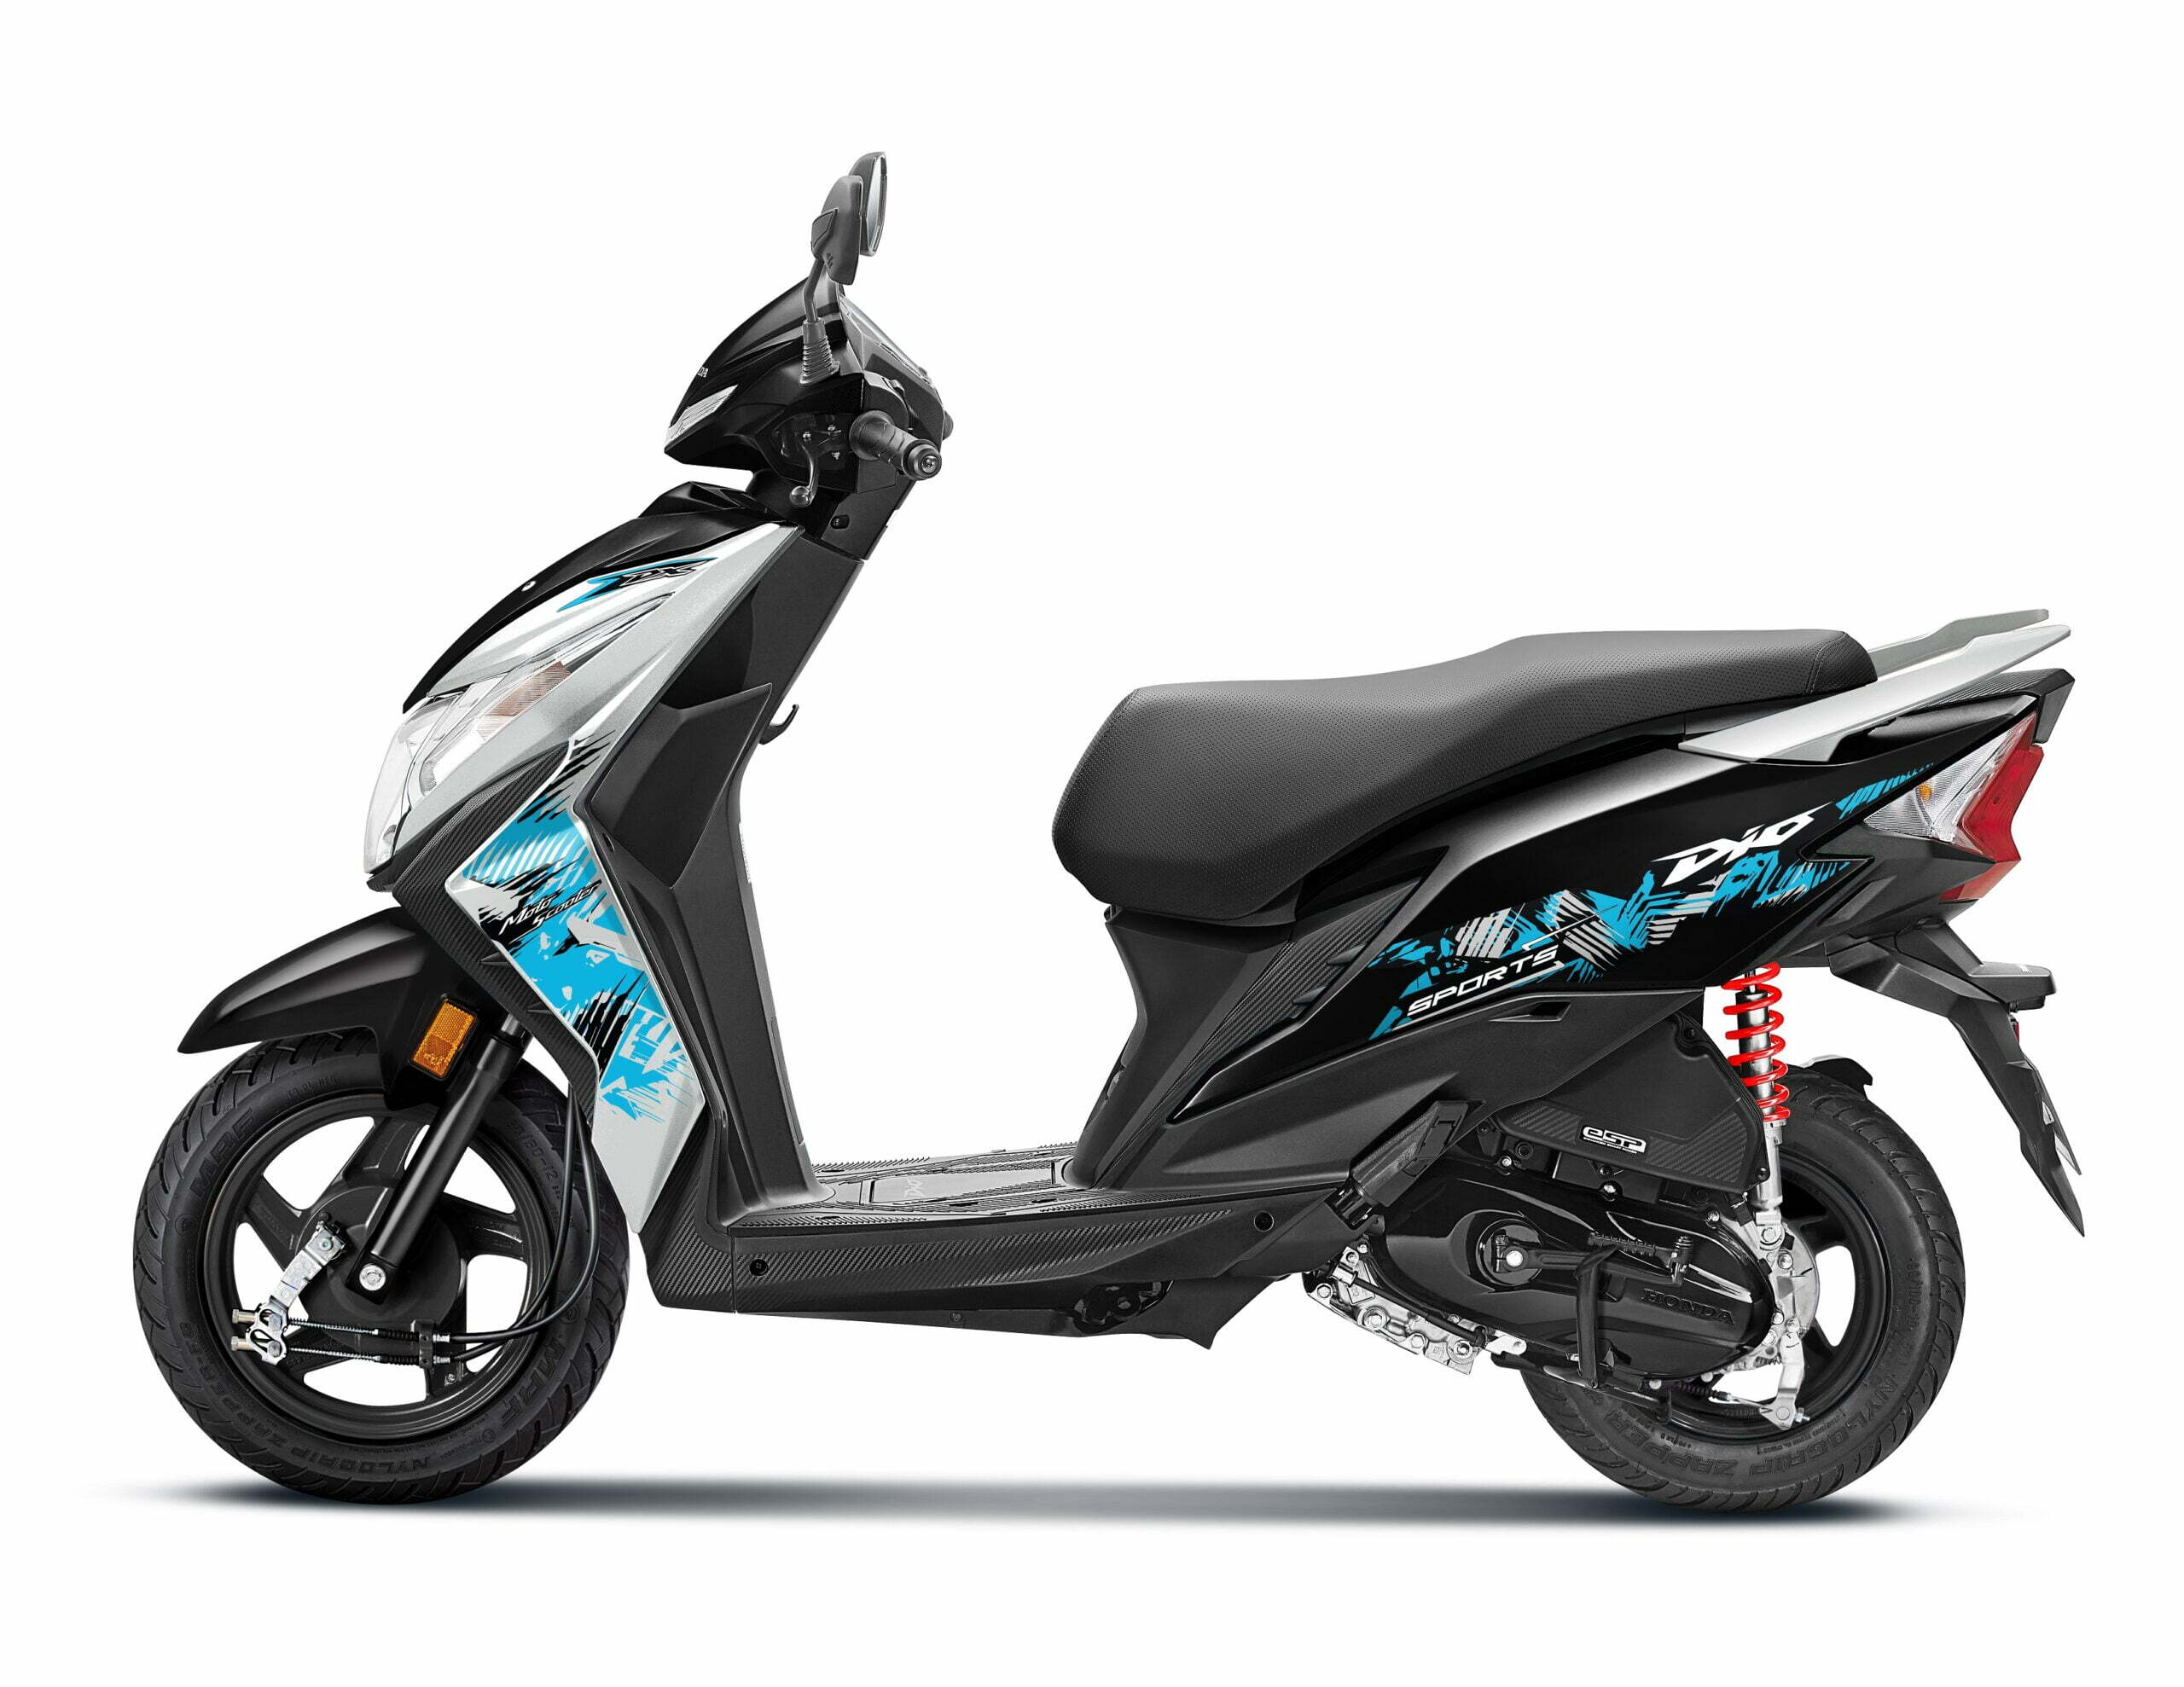 2022 Honda Dio Sports Launched With Cosmetic Updates (2)